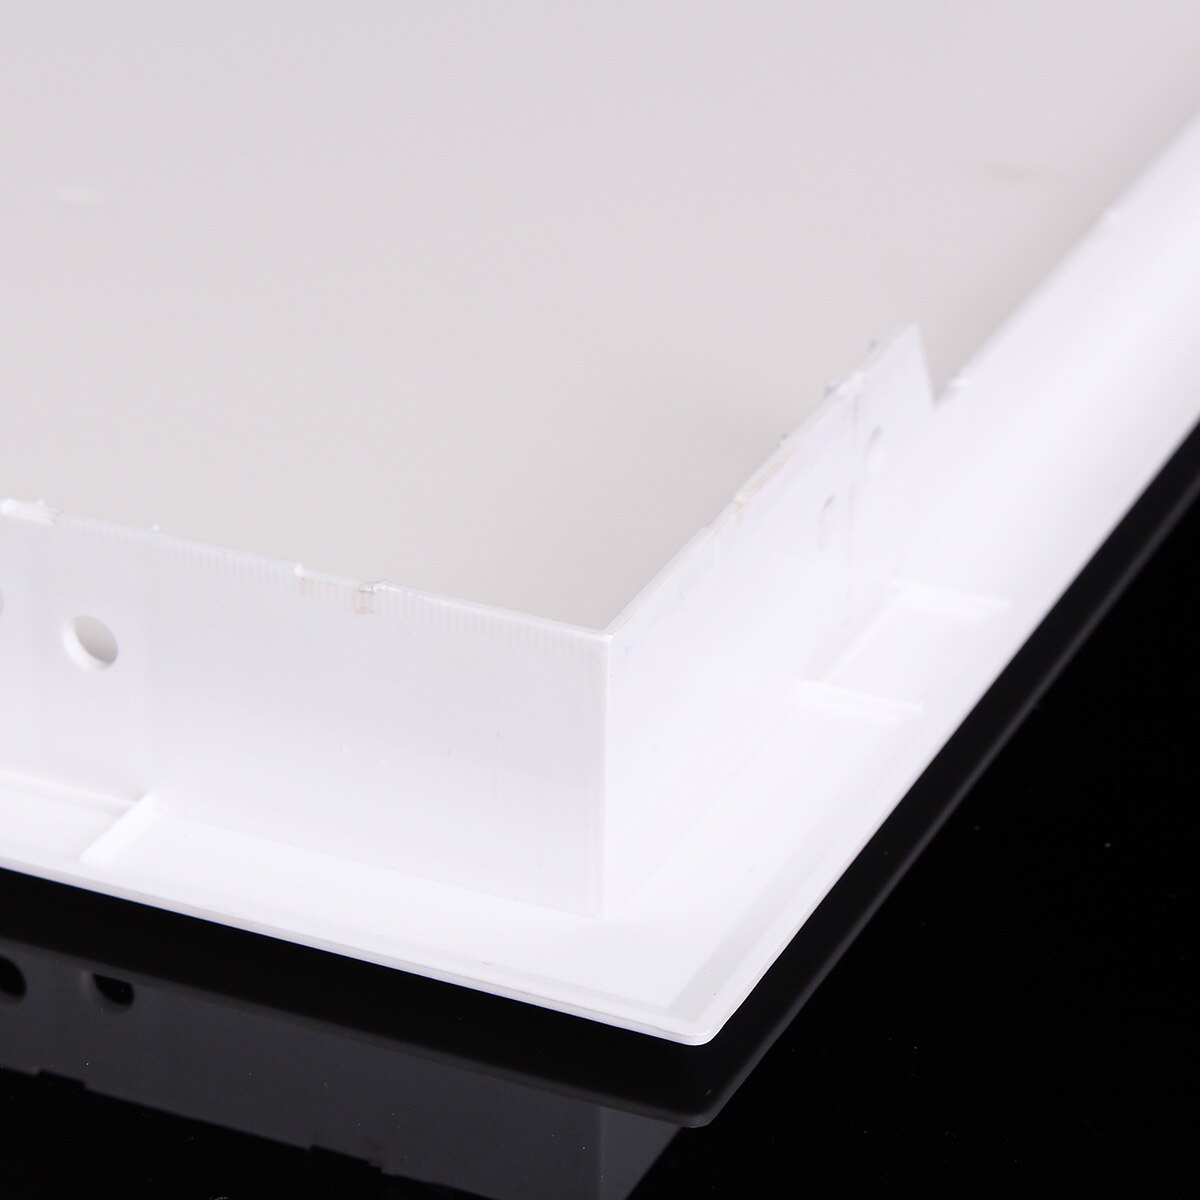 400x400mm Wall Ceiling Access Panel ABS White Inspection Plumbing Wiring Door Revision Hatch Cover